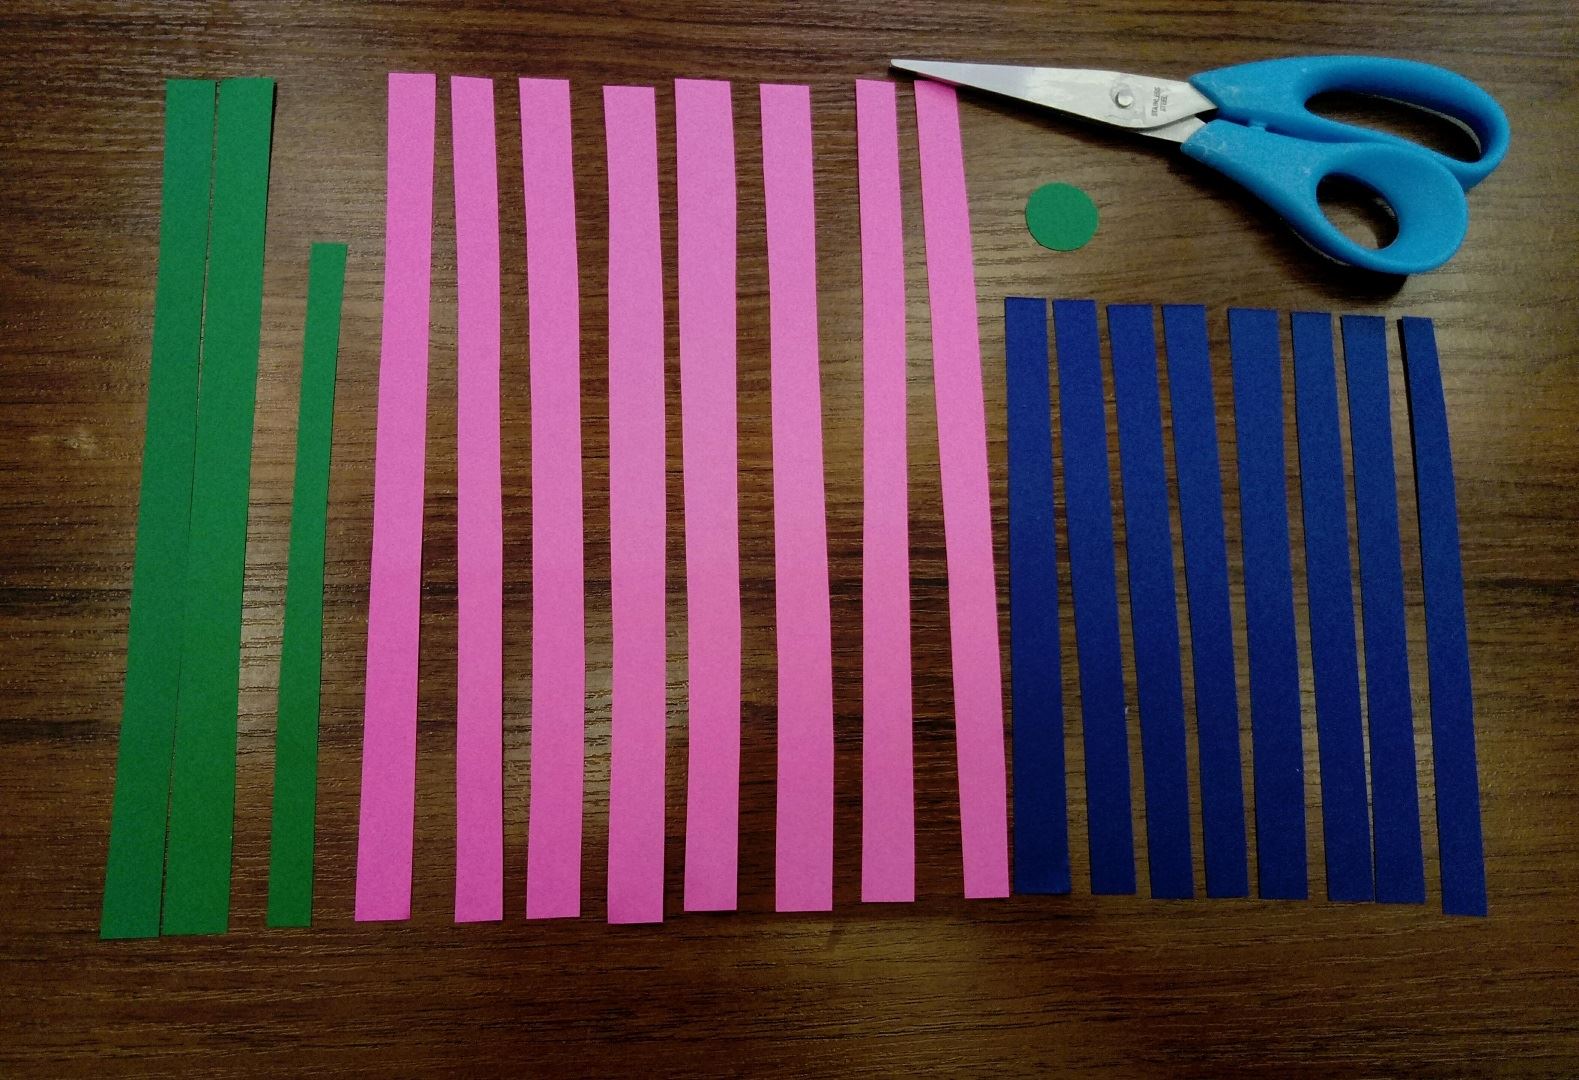 Let's begin from a very simple task, doing a lot of strips. Cut pink paper along into 8 identical strips. Cut horizontally 8 stripes out of the blue paper. Now take the green paper and cut out 2 long strips and one a bit shorter and a small circle. When everything is done, we can continue!